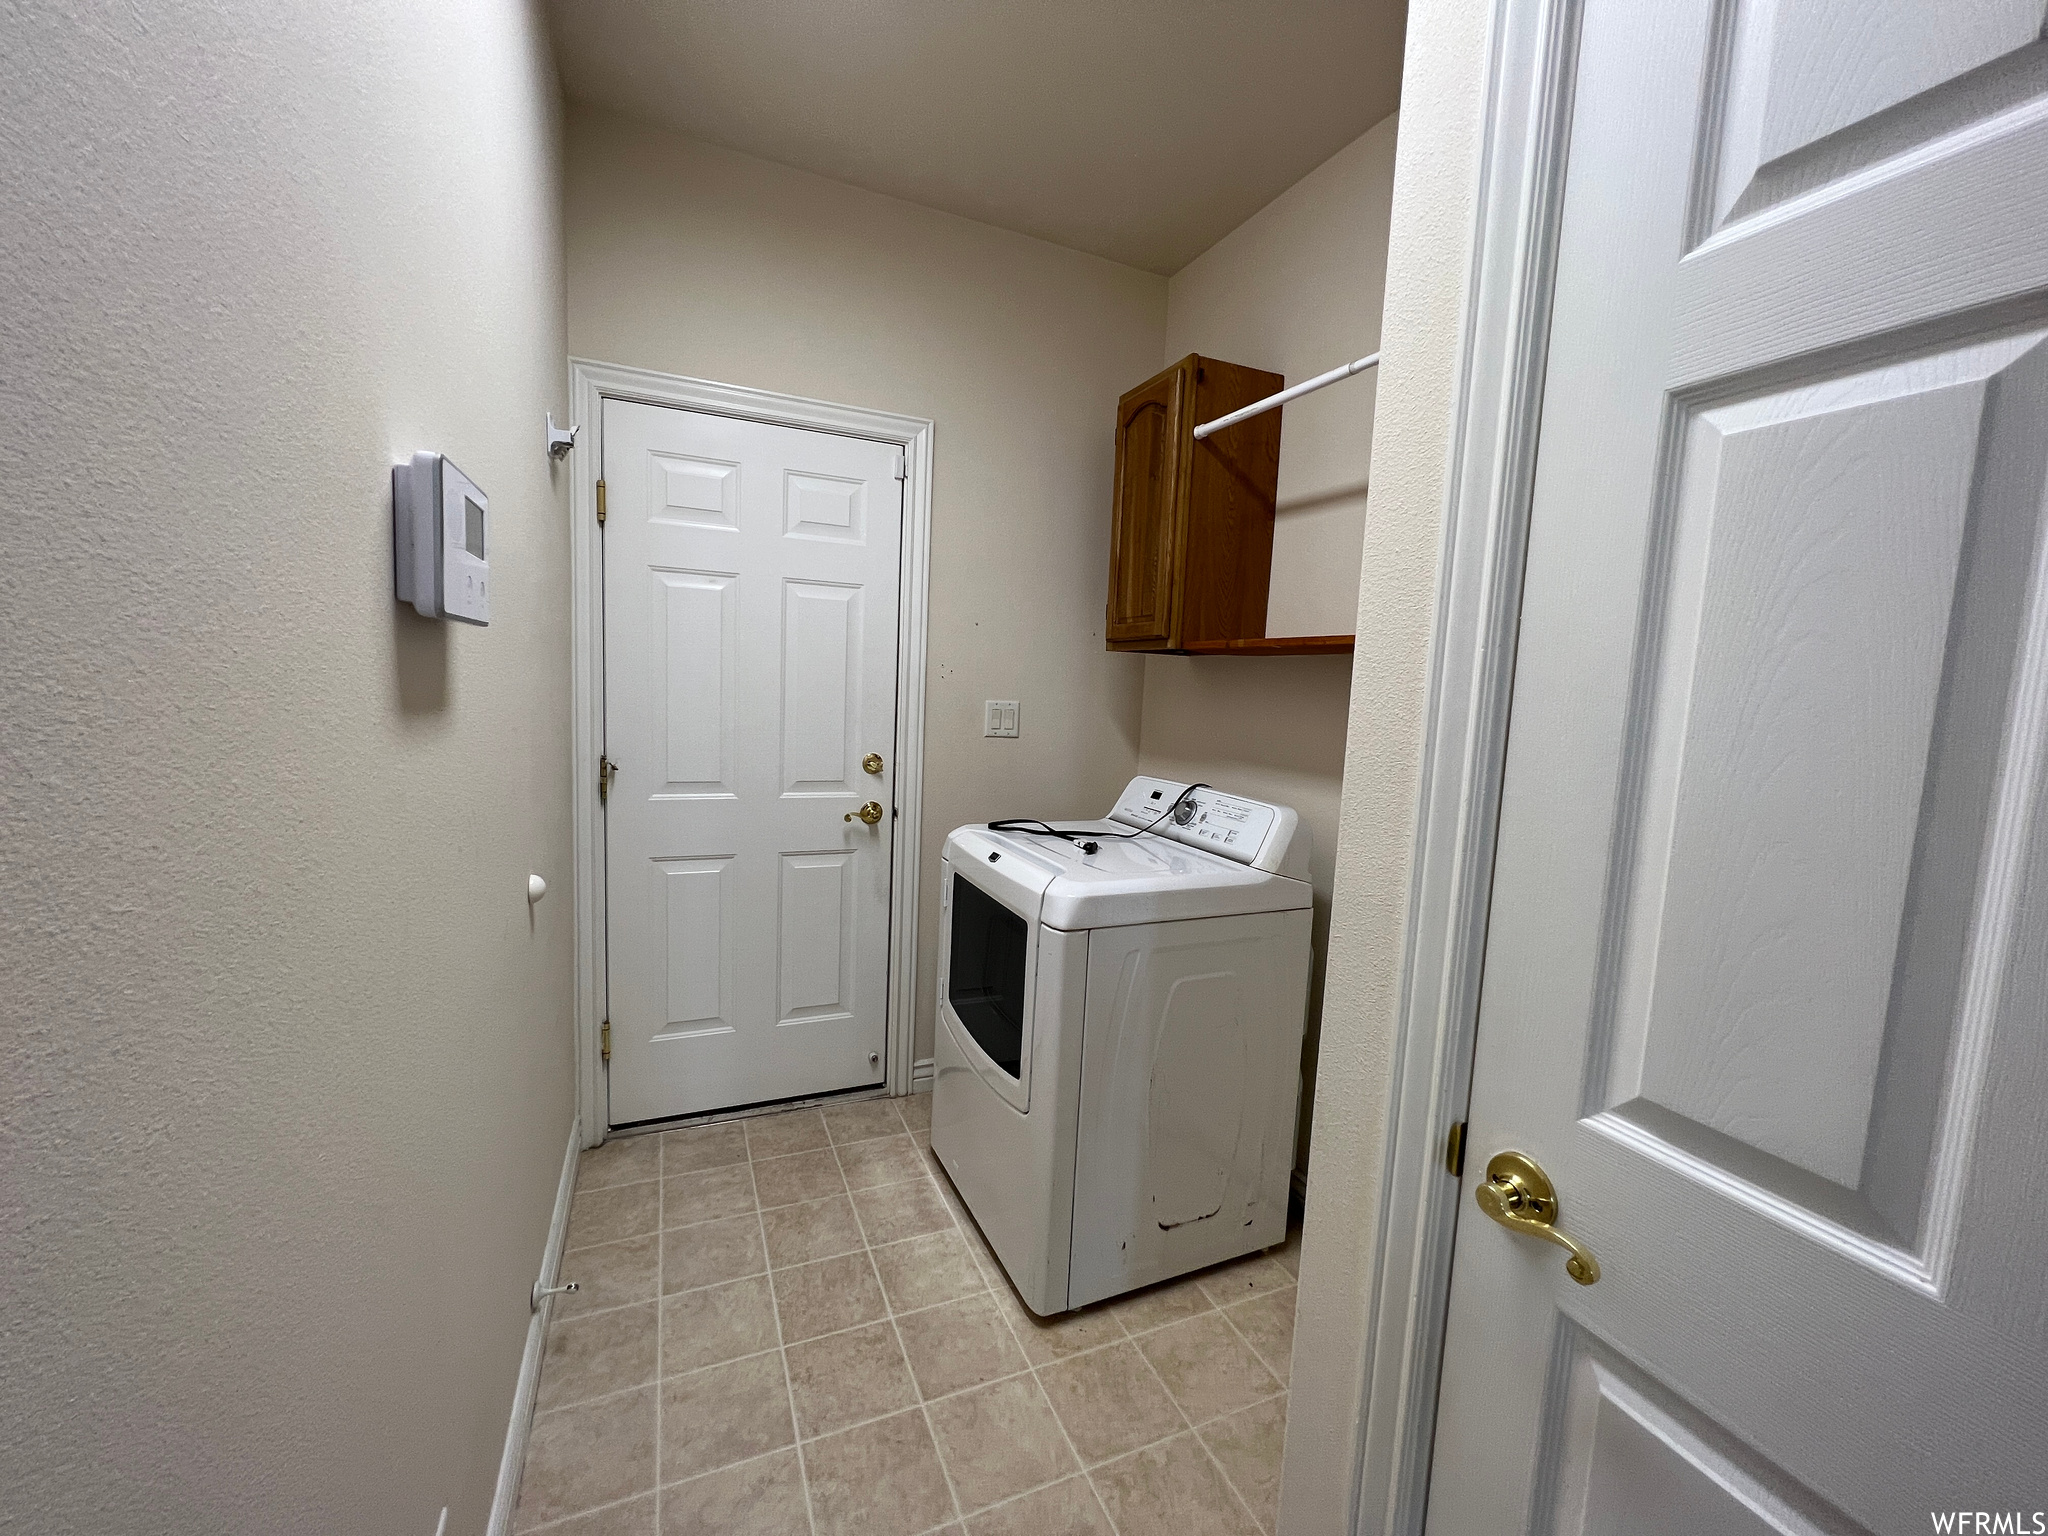 Clothes washing area featuring washer / clothes dryer and light tile floors